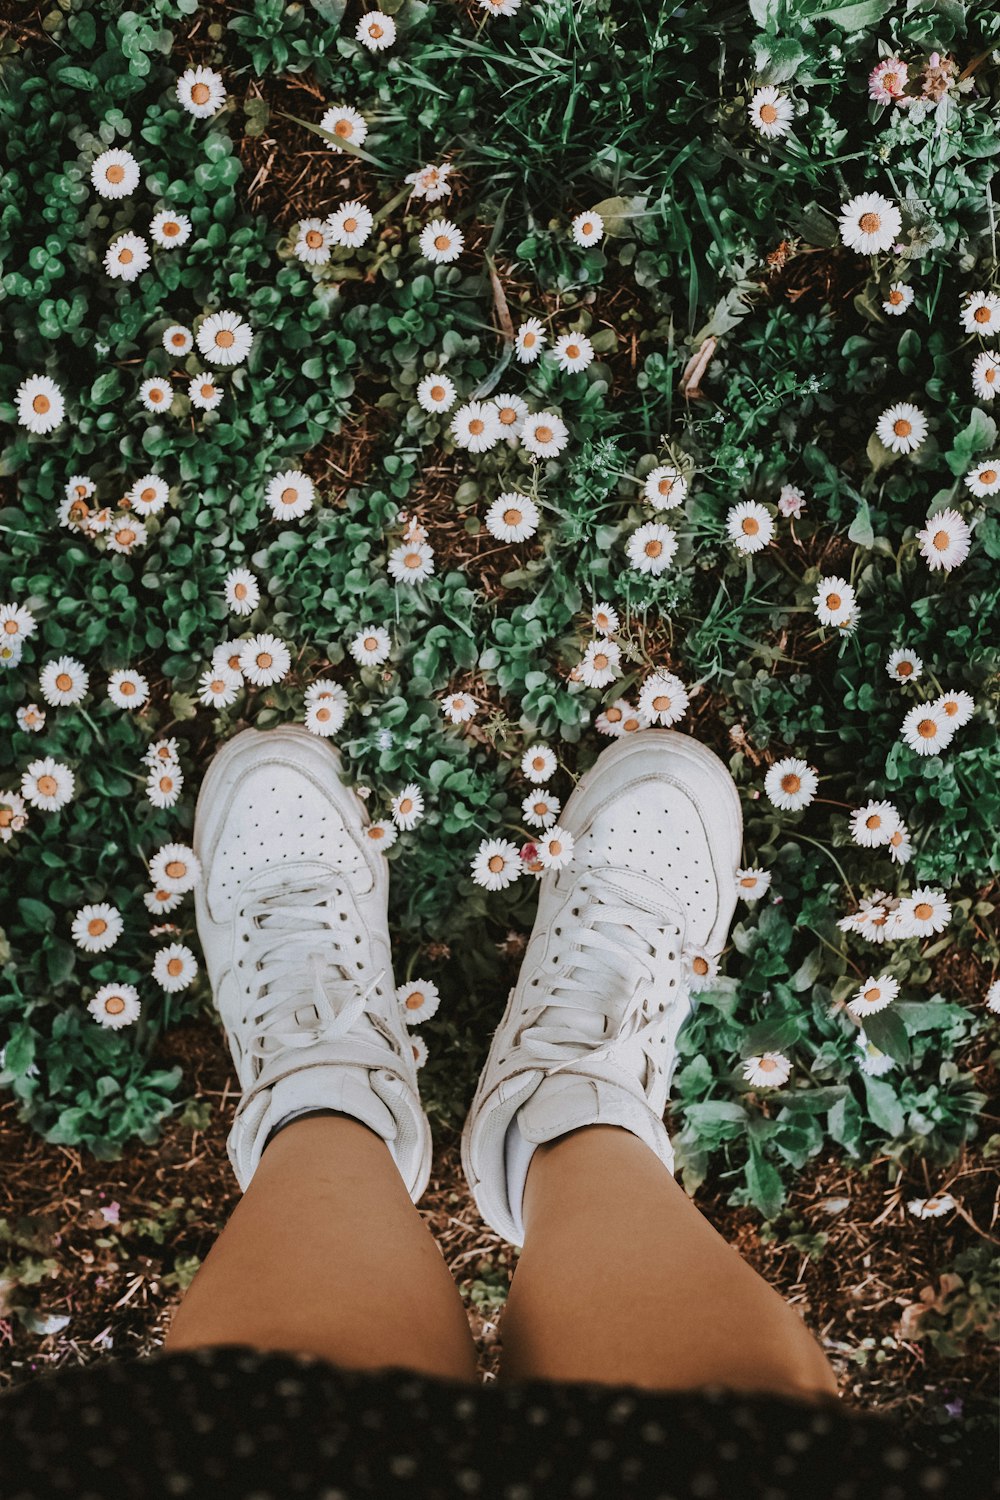 person in white sneakers standing on red and white flowers